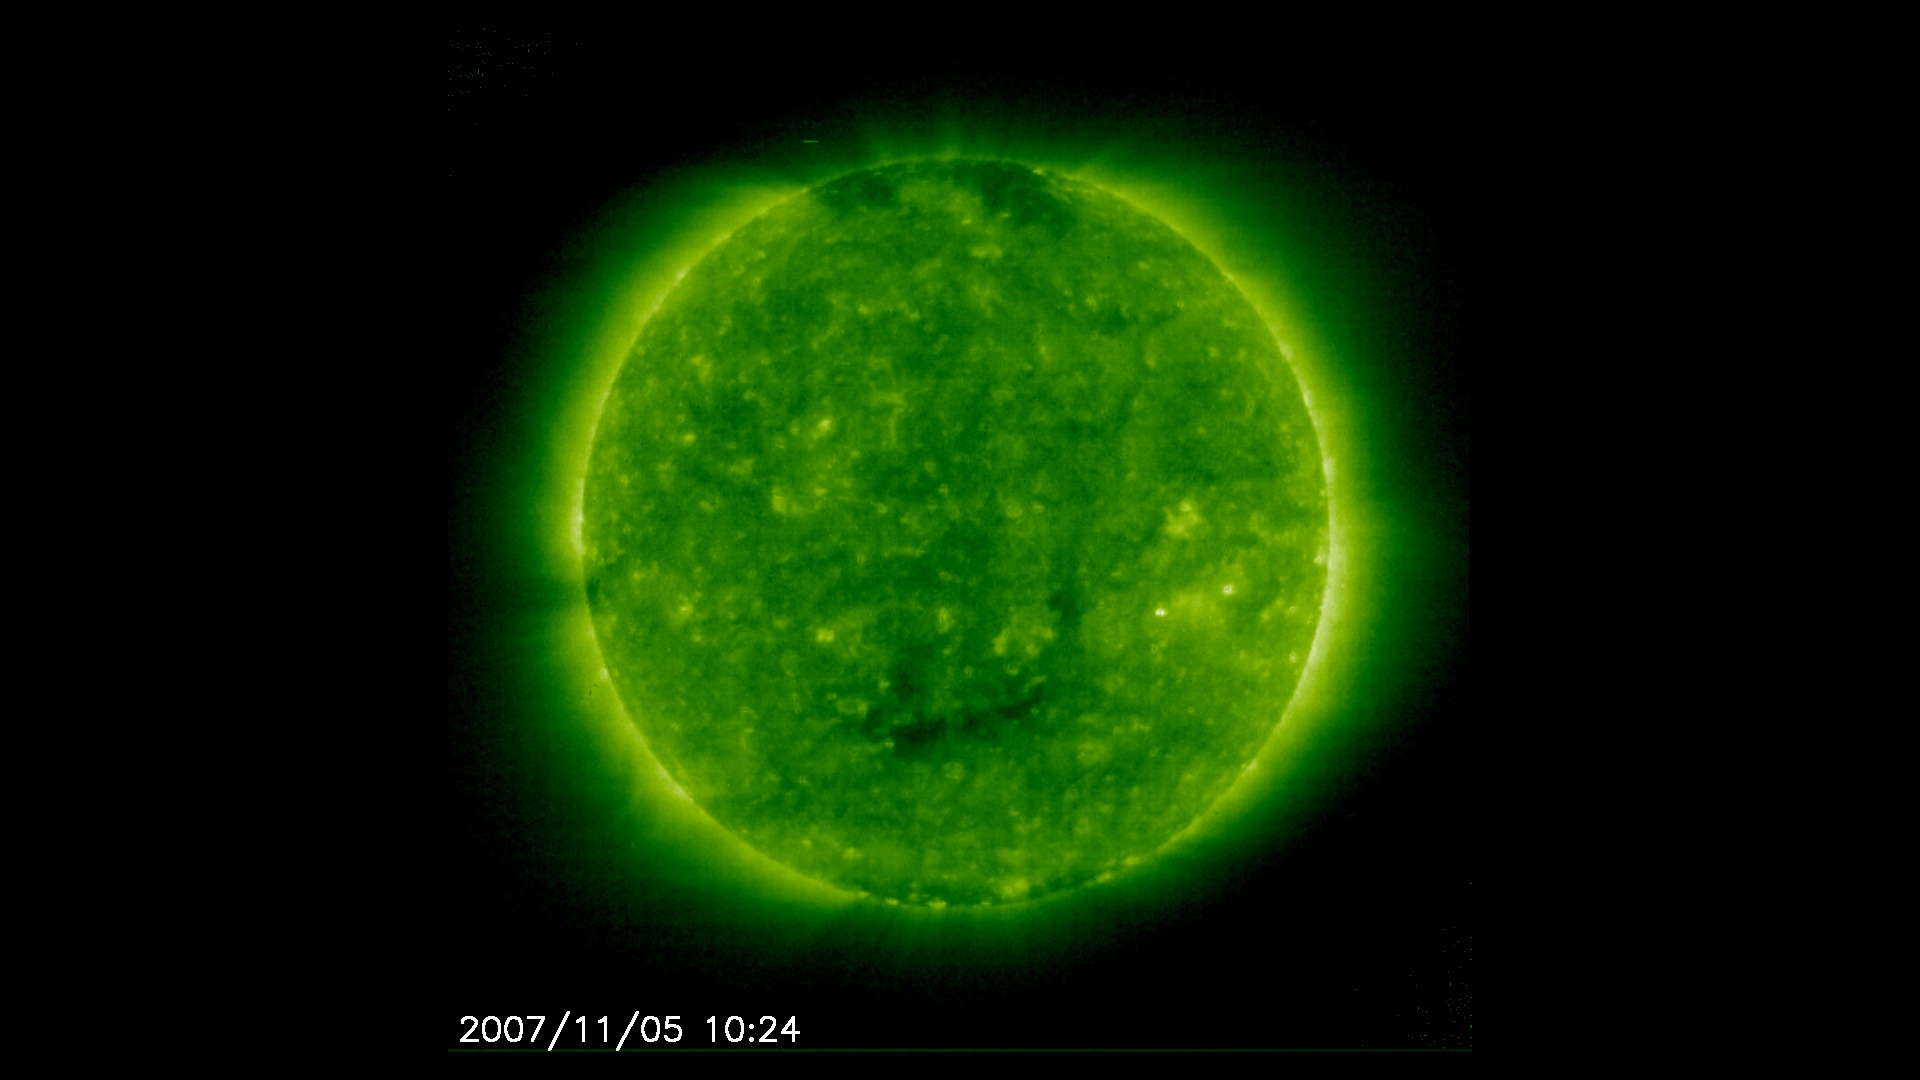 This is a short movie of the Sun in ultraviolet light at solar minimum.